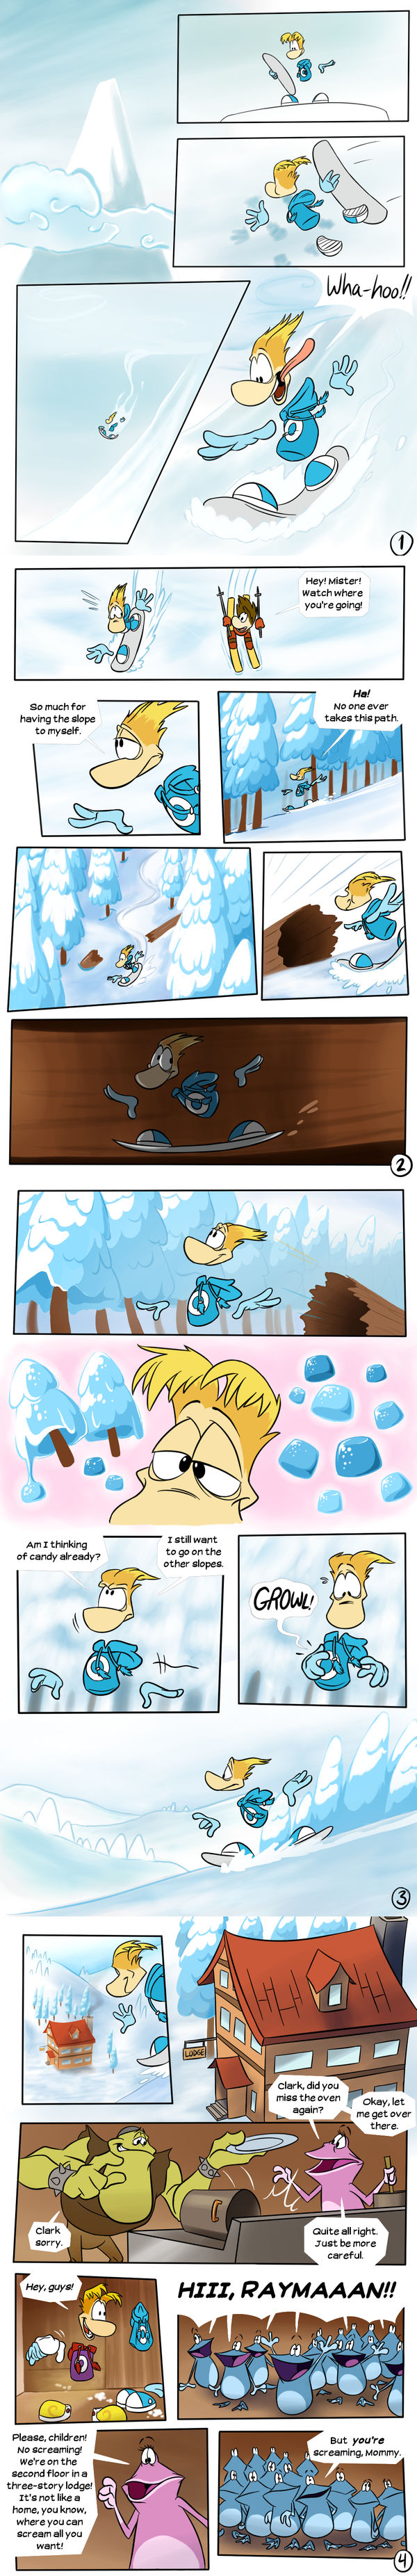 Rayman is Not Pleased by EarthGwee on DeviantArt